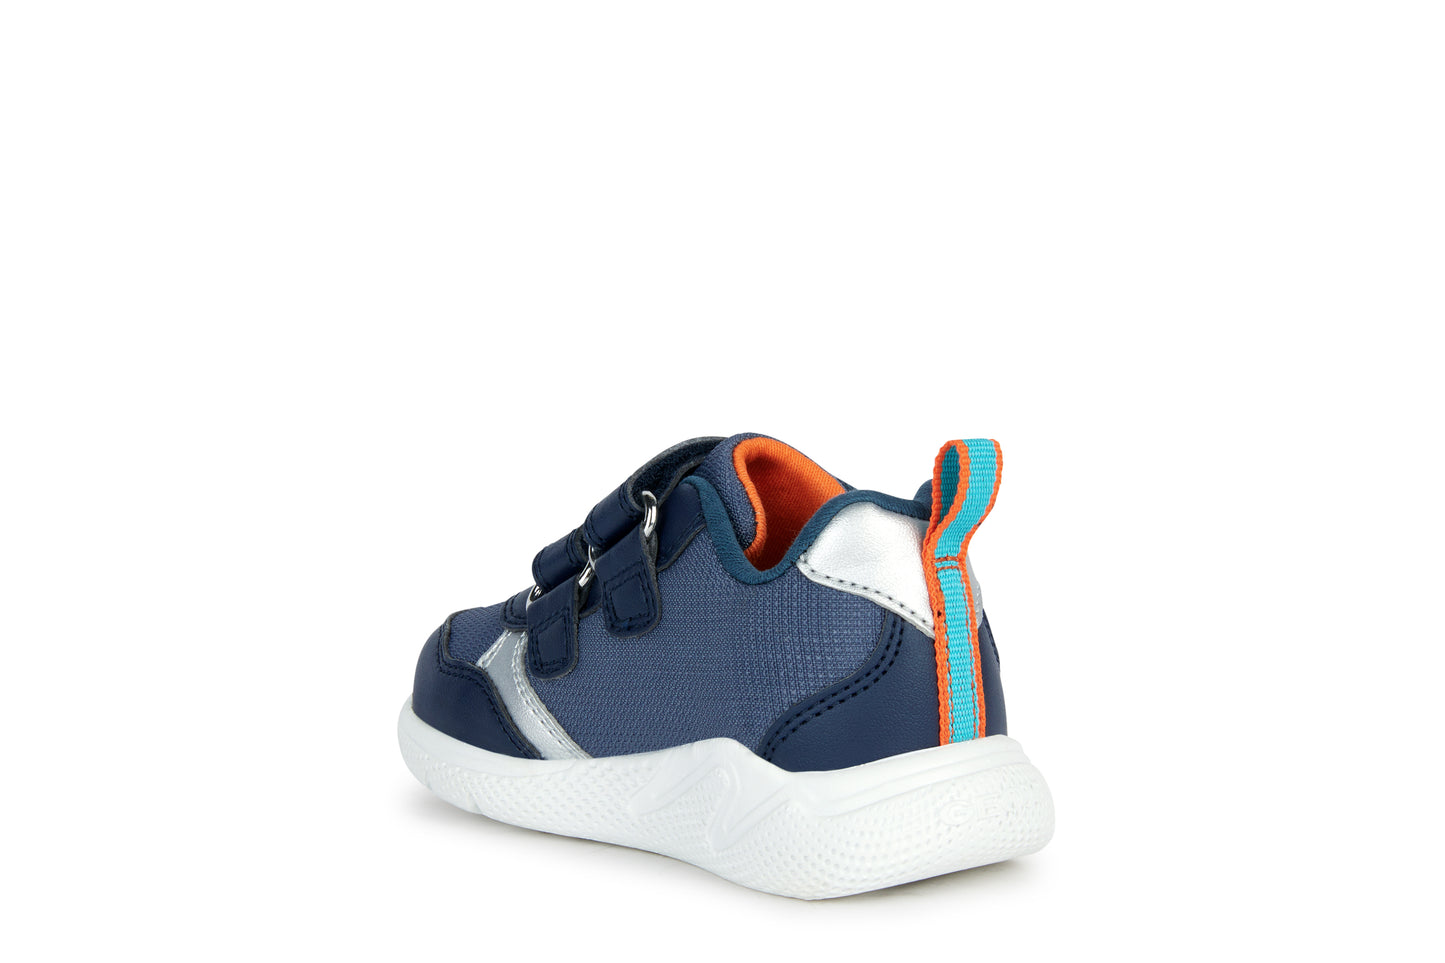 A boys trainer by Geox, style Sprintye, in navy and orange with double velcro fastening. Inner side view.